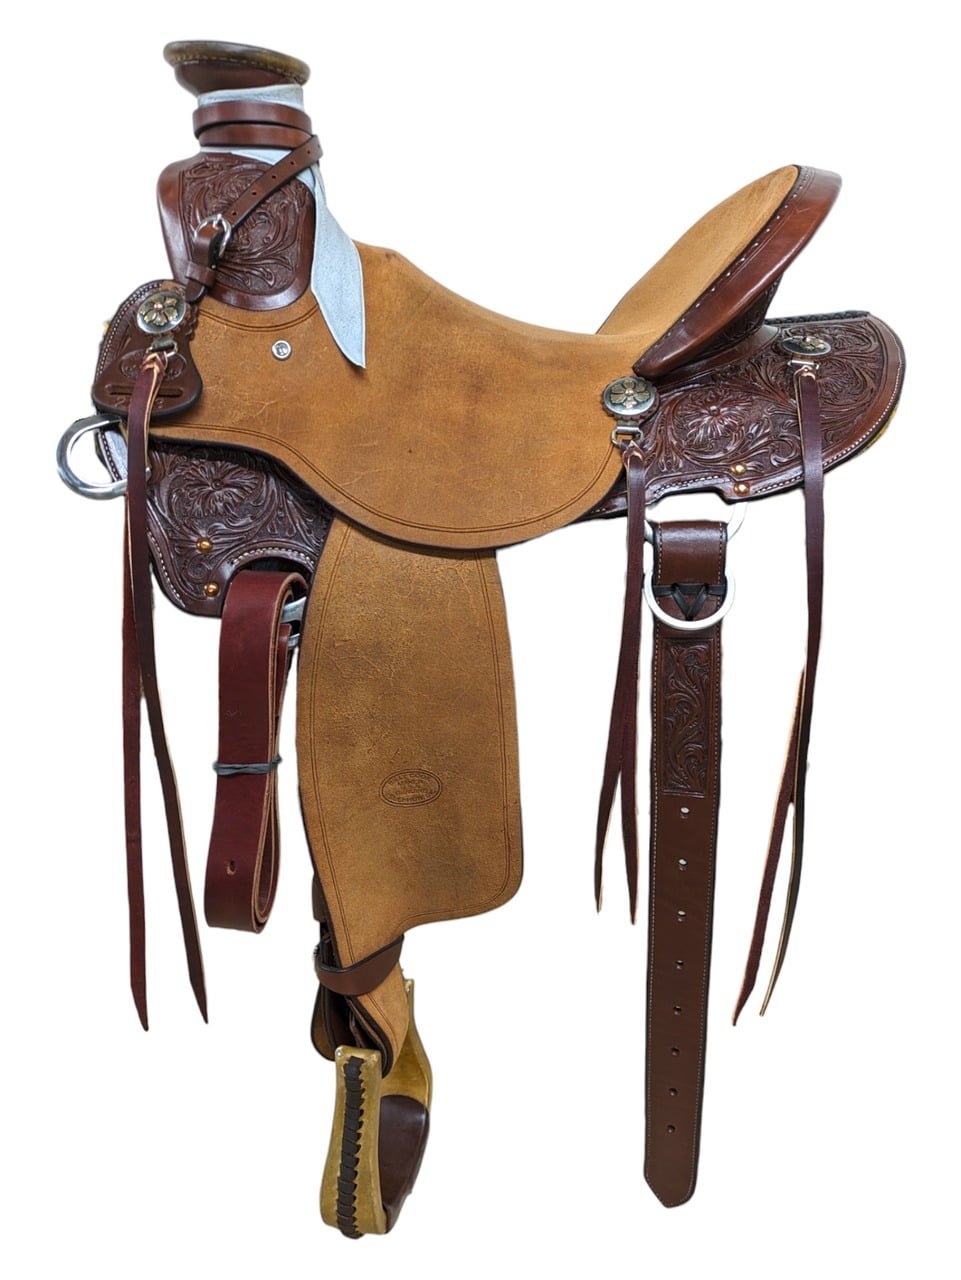 Designed for ranch and trails, this versatile all-around saddle gives you a wade front that give you more room for your thighs. It has a short rounded skirt to fit short backed horses, nice wide fit bar with flare for shoulder movement, and a roughout seat for added security and grip. The tree is reinforced with a post horn and comes with strings for all your gear and a rear flank strap. Beautiful floral tooling with border stamp is all hand-tooled by professional leather workers. Saddle Features Natural rough out seat jockey and fenders Medium oil smooth leather skirt, pommel, cantly and cheyenne roll Two line border featured on rough out Full floral tooling on smooth leather with a two line border Rounded single skirt  Easy single dropped rigging Mixed metal floral conchos with mini d-rings and tie strings Includes mule hide horn wrap and leather rope strap Includes rear cinch and rawhide covered stirrups Serial number: 102293 Saddle Specifications Cantle Height: 4.5" Horn Height: 3" Skirt Length: Approx. 24" Weight: Approx. 30 lbs Tree Size: 15.5" Seat Size: 15" Gullet: 7" mid-concho to mid-concho